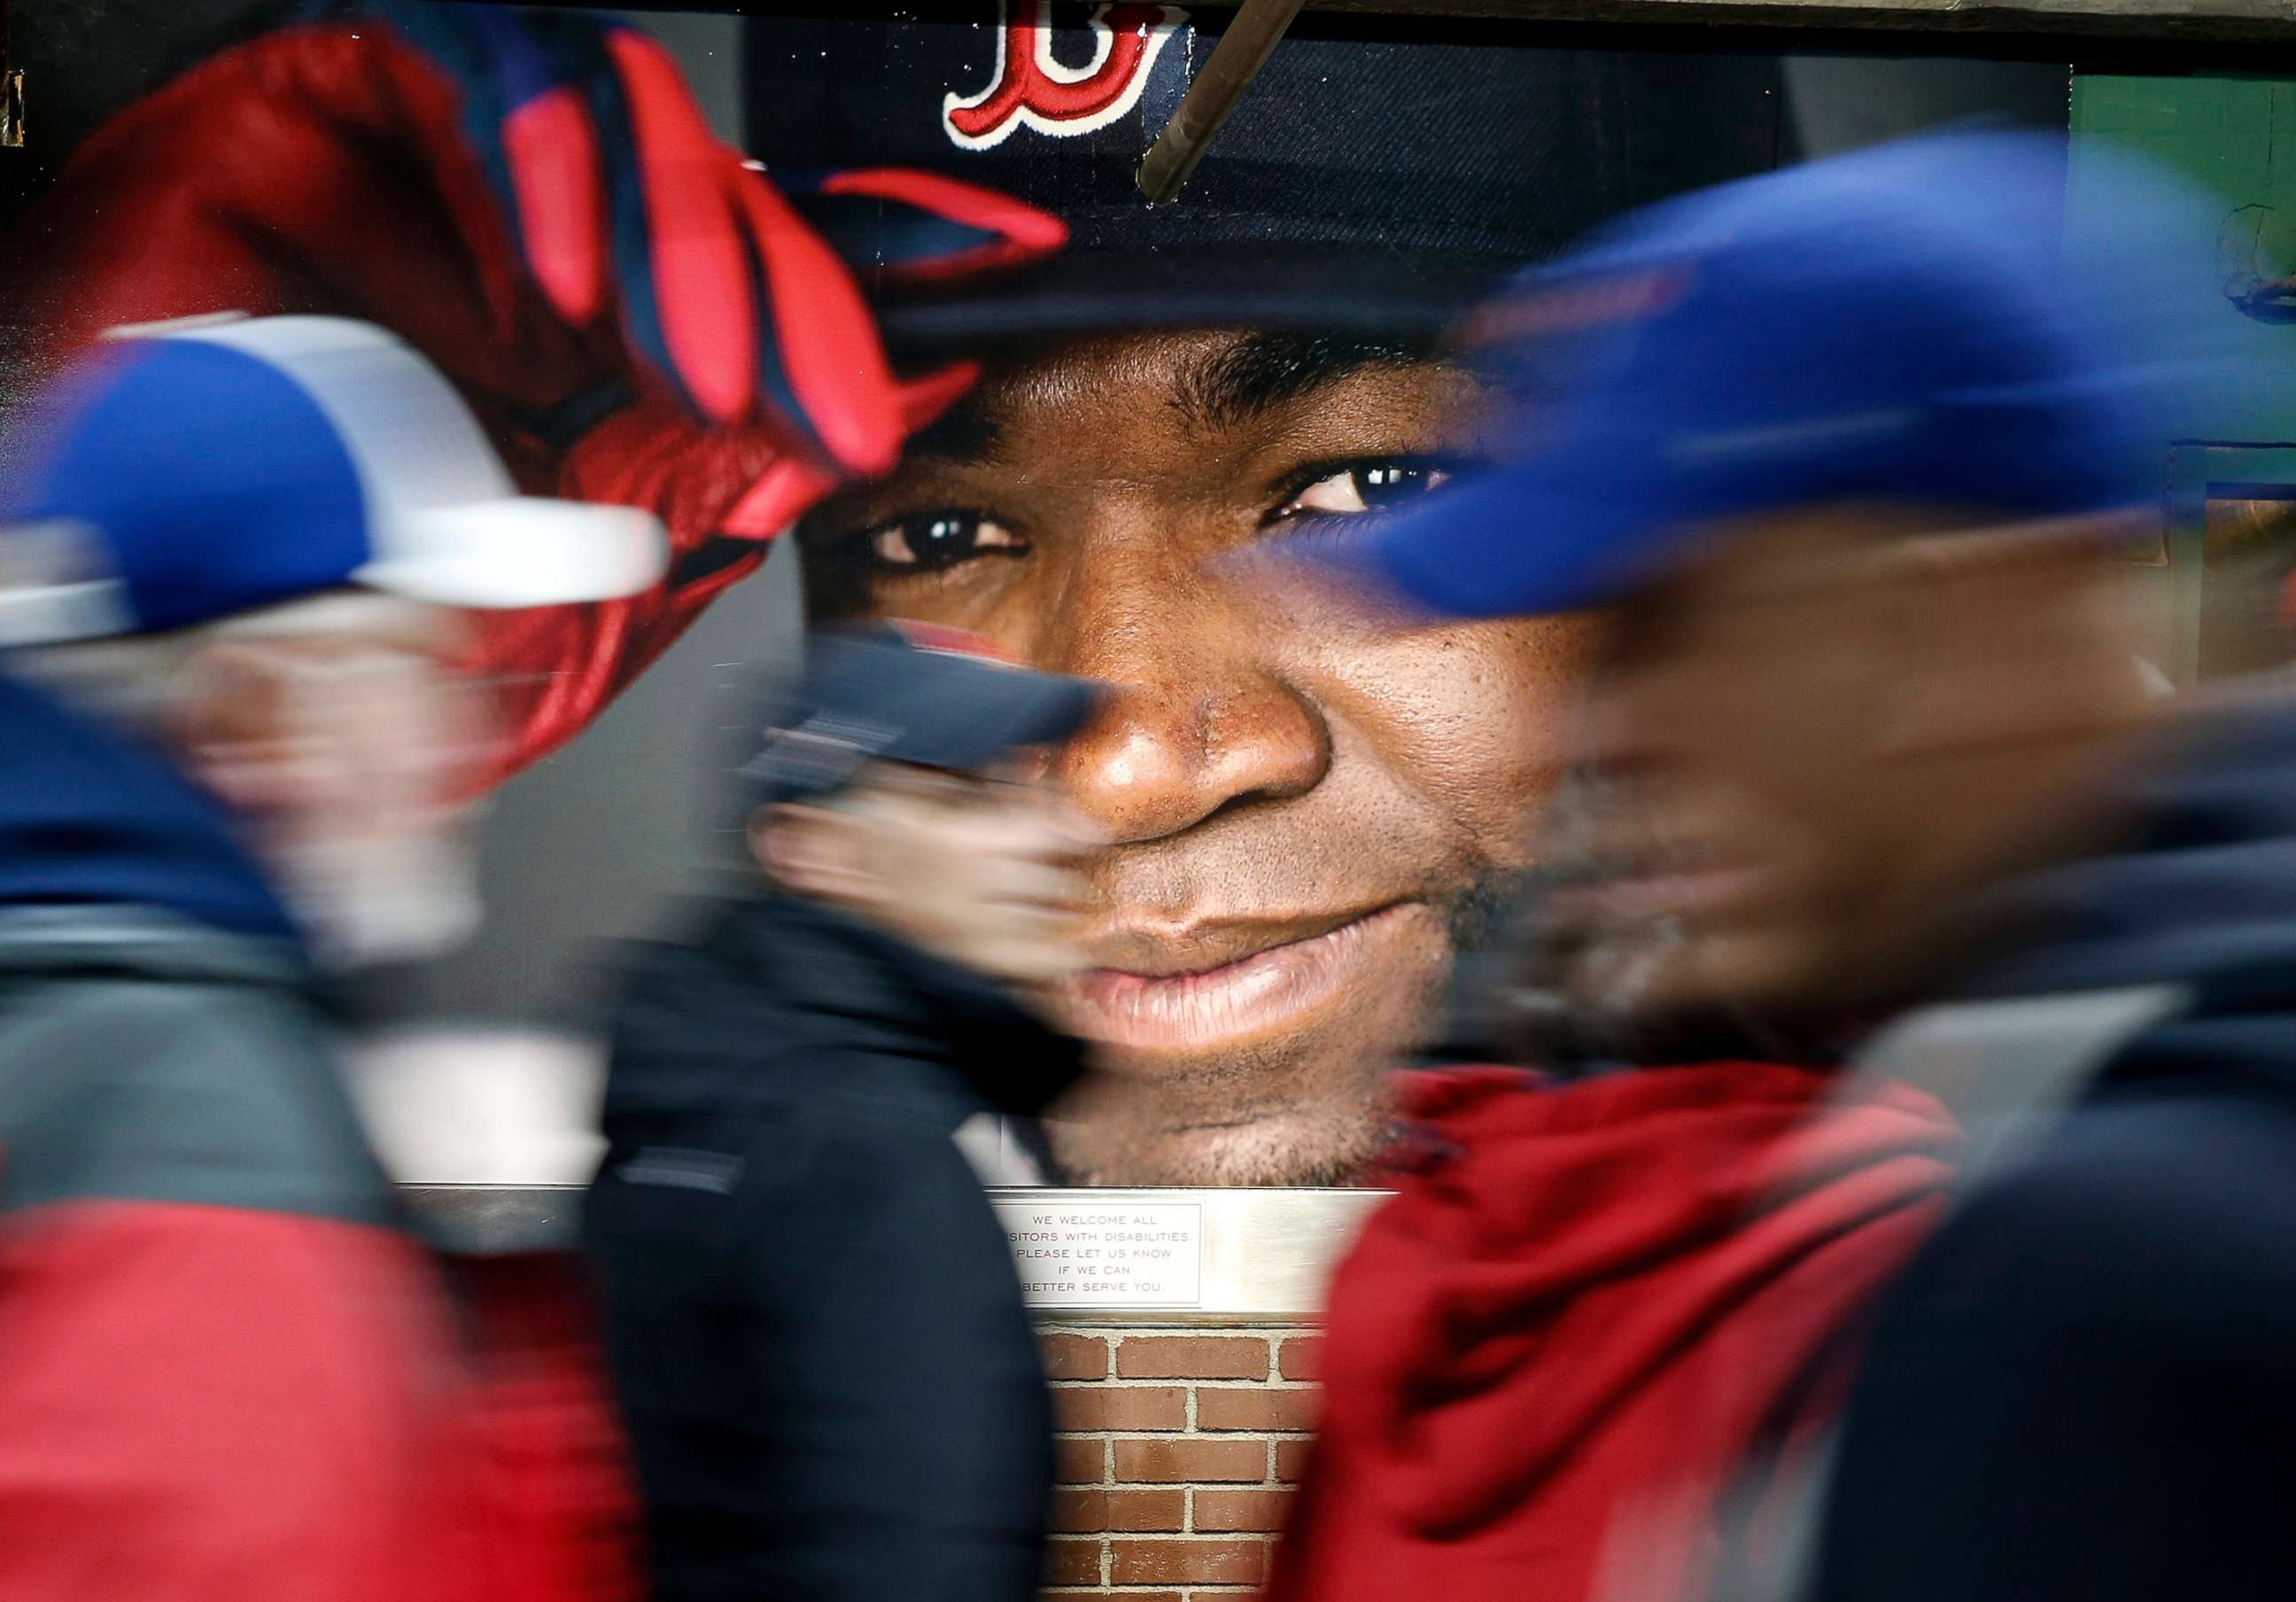 PHOTO: Fans at walk past a photograph of Boston Red Sox's David Ortiz before a baseball game at Fenway Park in Boston, Oct. 1, 2016.